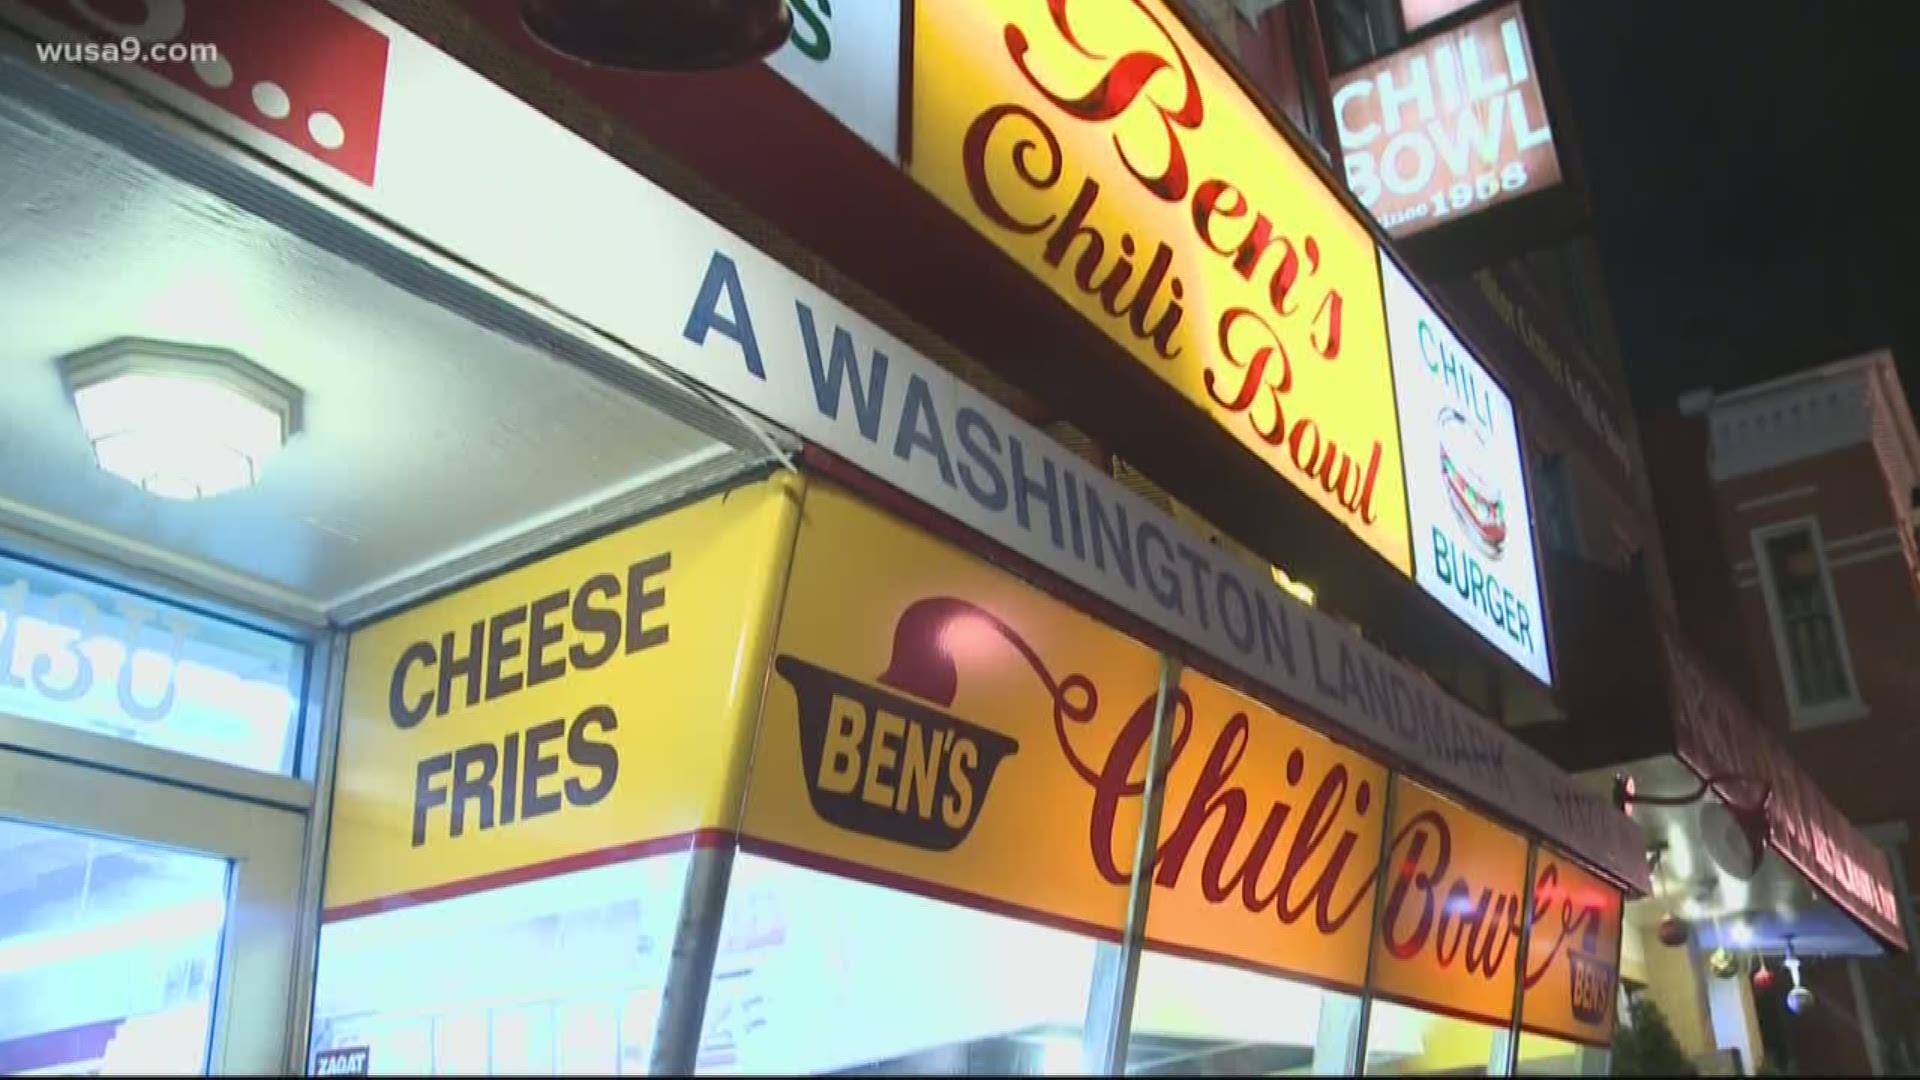 New numbers from the National Restaurant Association show that thousands of restaurants will not reopen after COVID-19. Ben’s Chili Bowl is one of those at risk